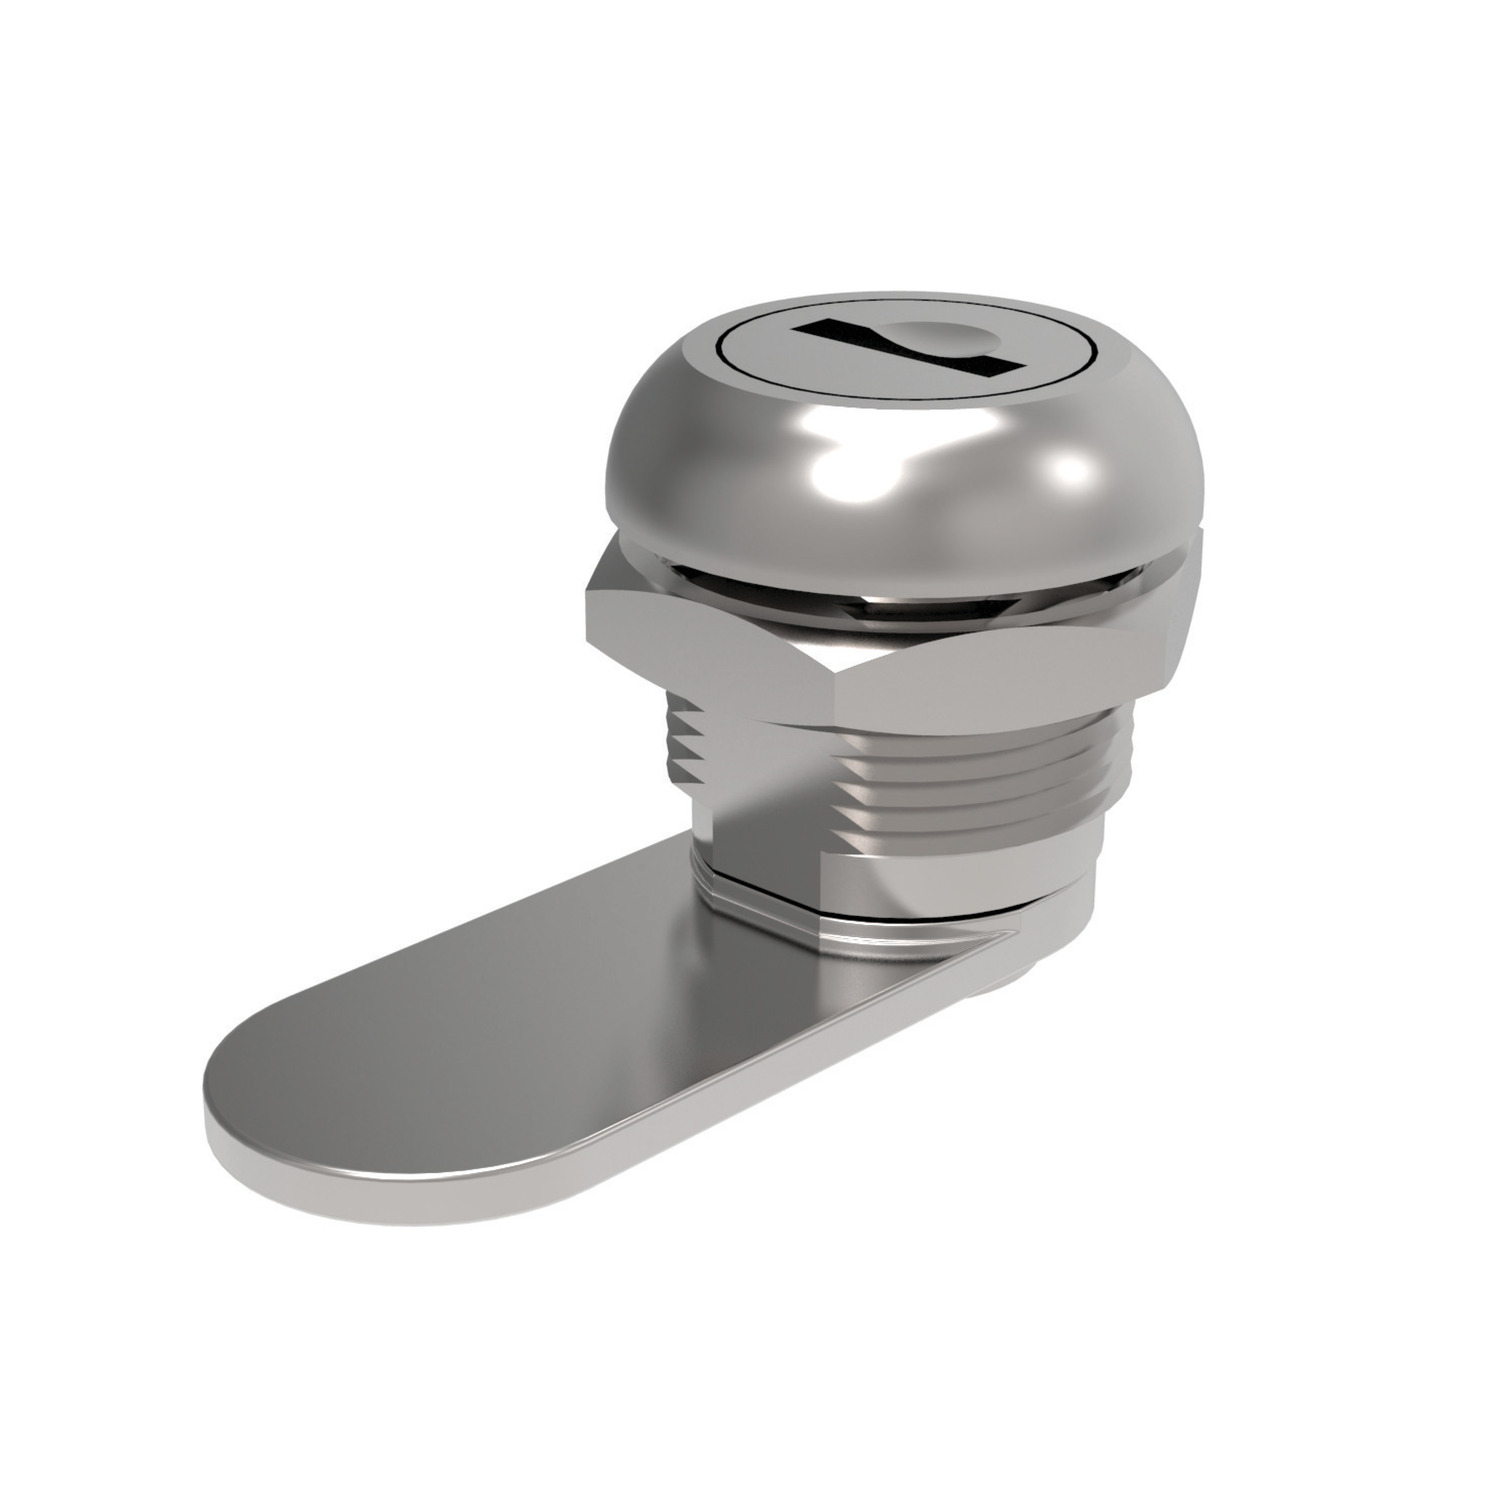 A2383.AW0010 Mini Cam Locks Fixed grip - zinc. Nut Fixing - Keyed alike. Supplied in multiples of 5.